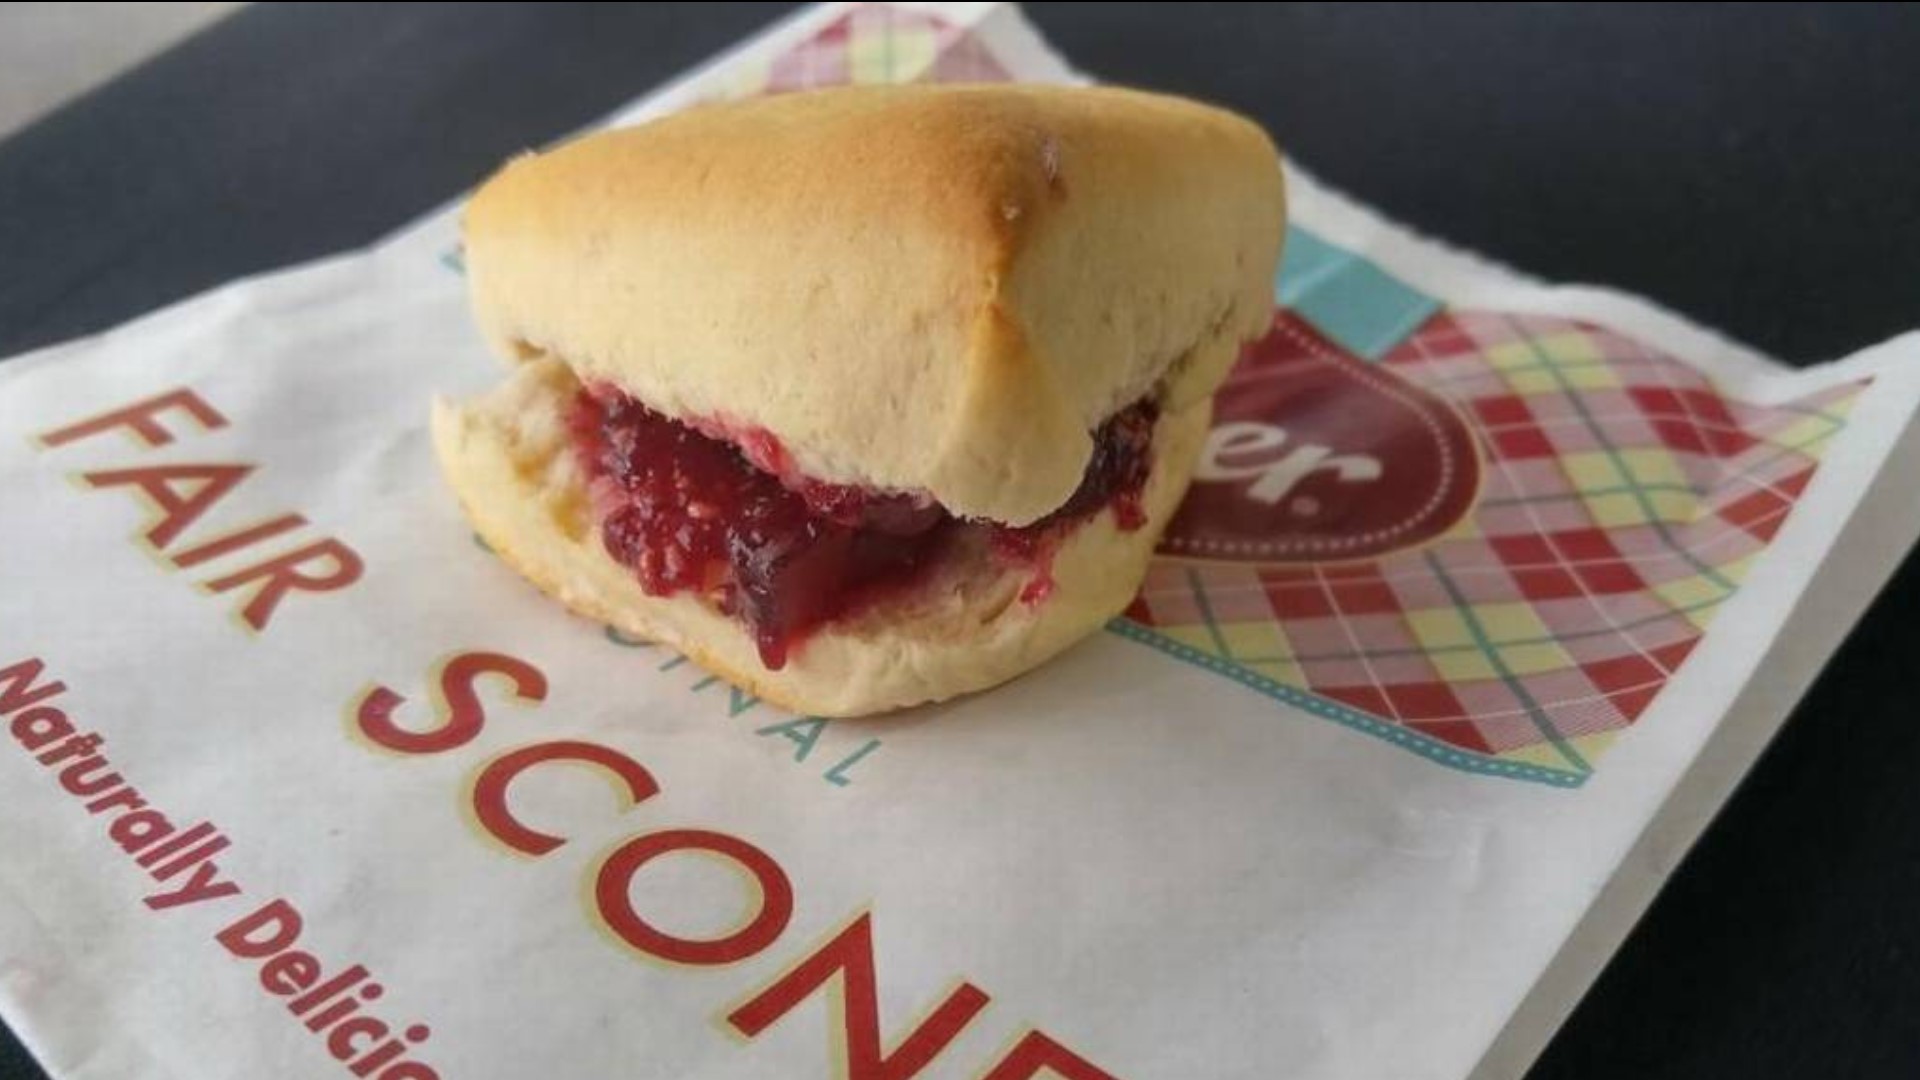 The box contains scone mix, raspberry jam, and signature packaging. #k5evening